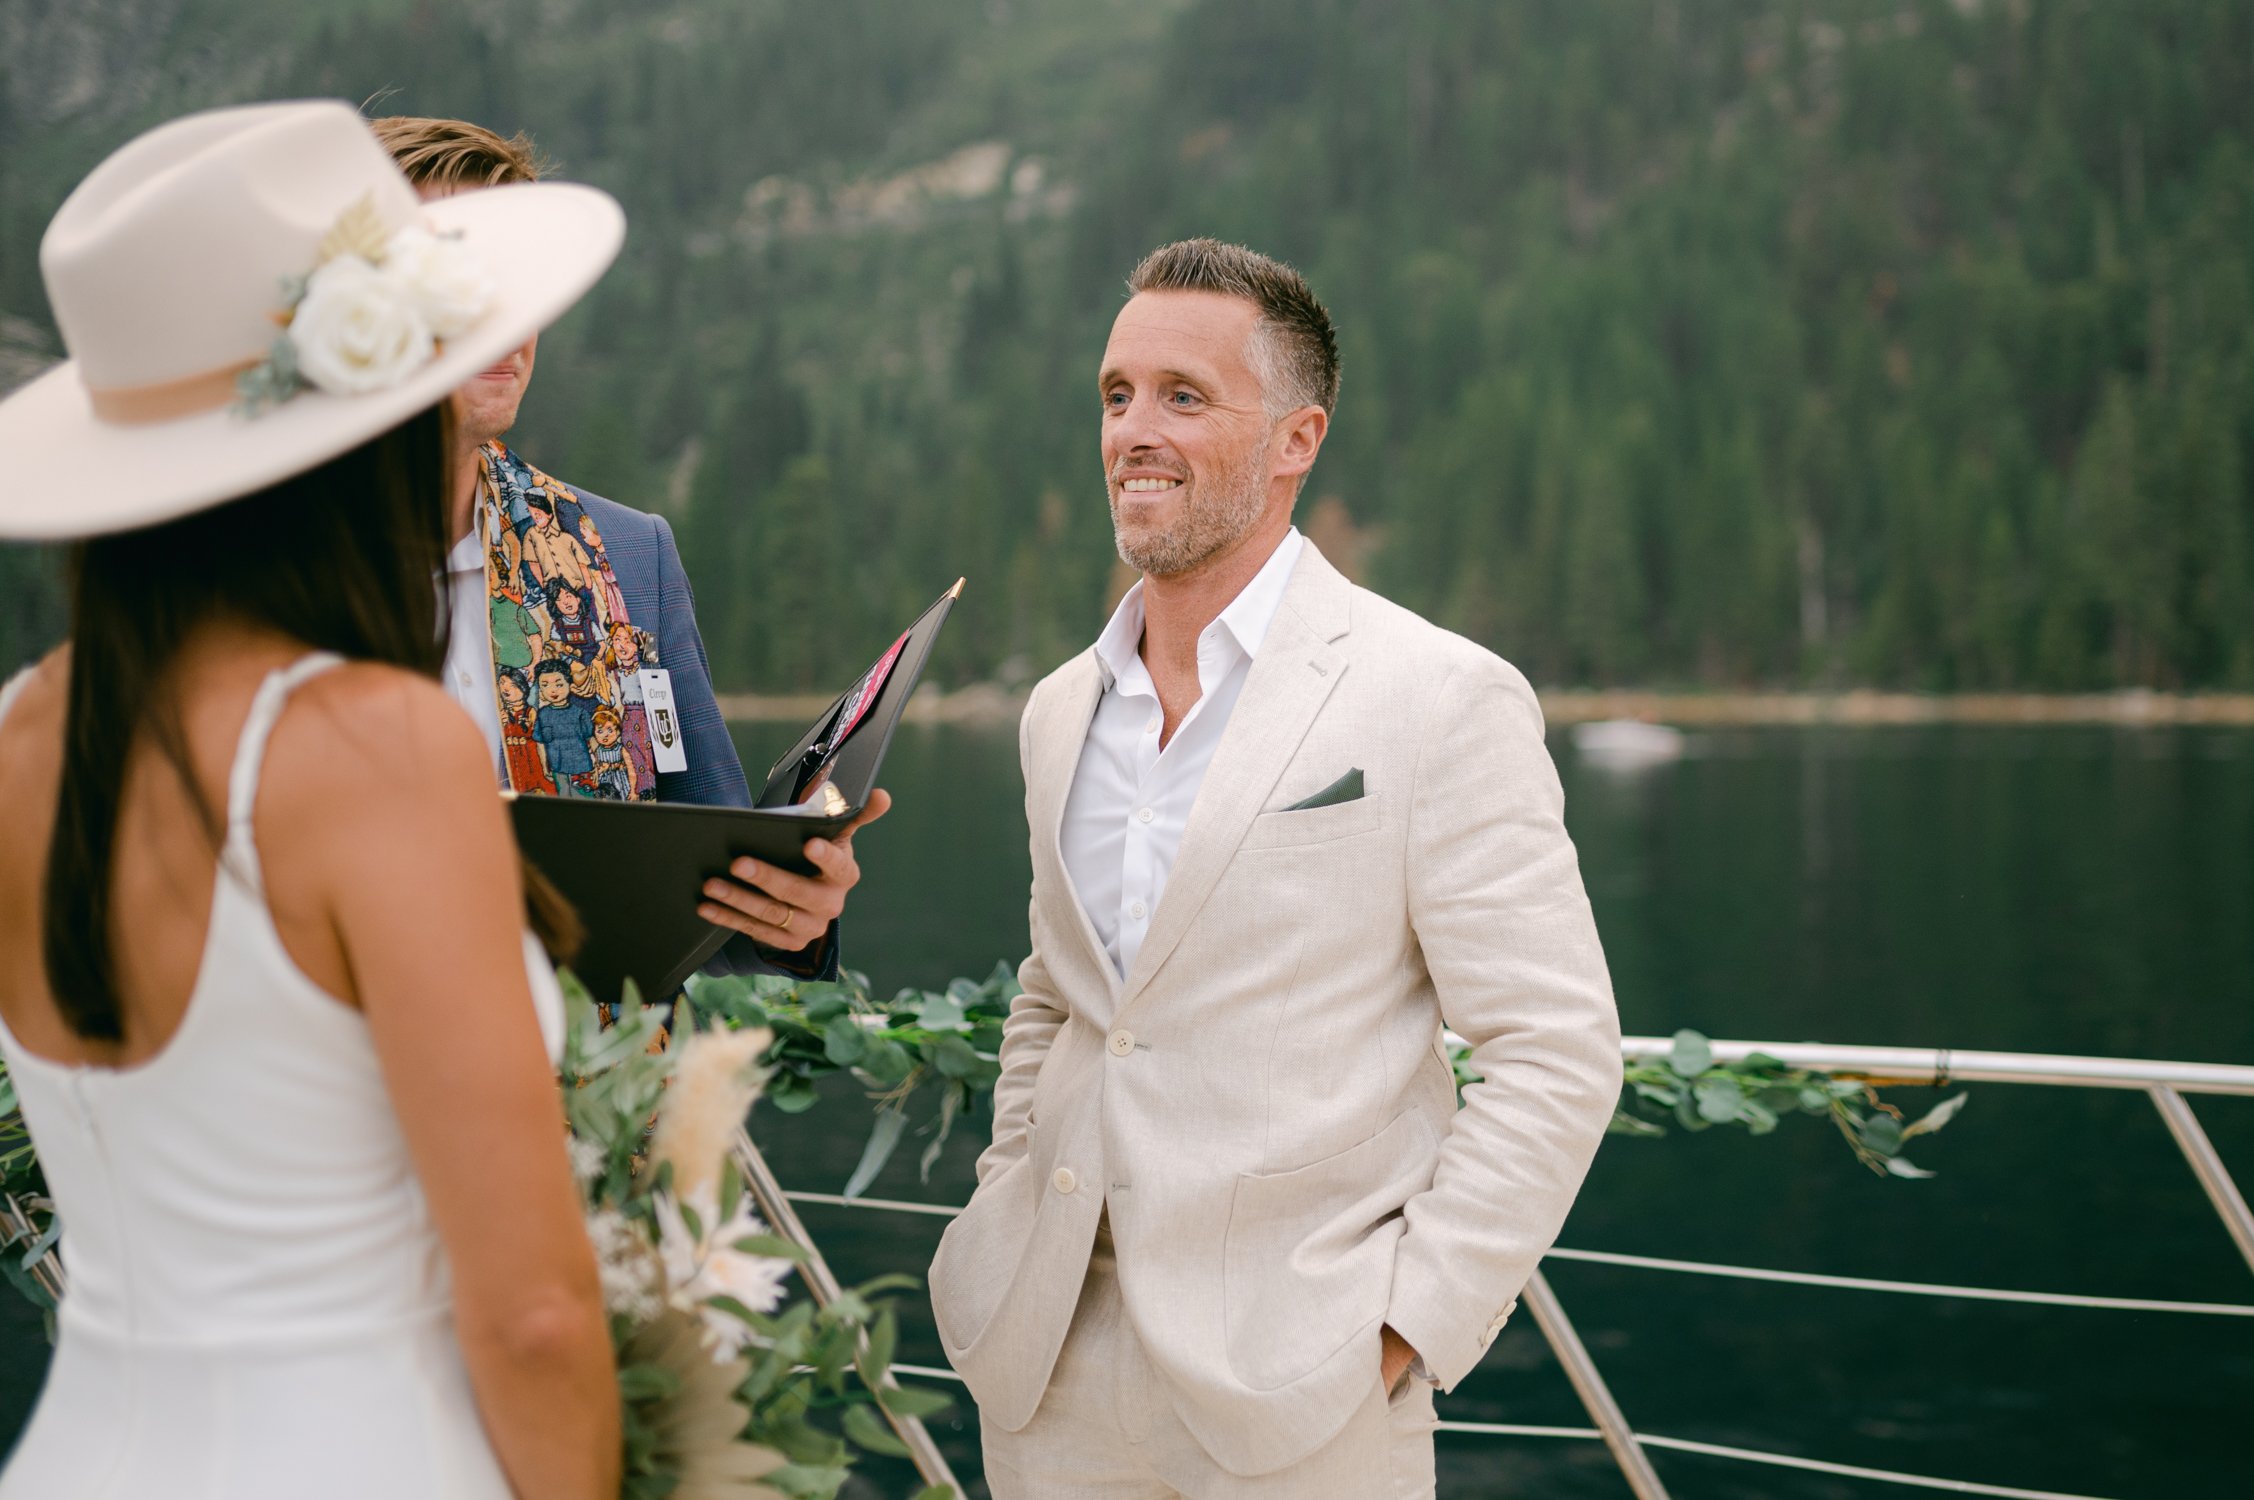 Lake Tahoe Yacht wedding, photo of couple having their wedding ceremony on a boat in front of emerald bay